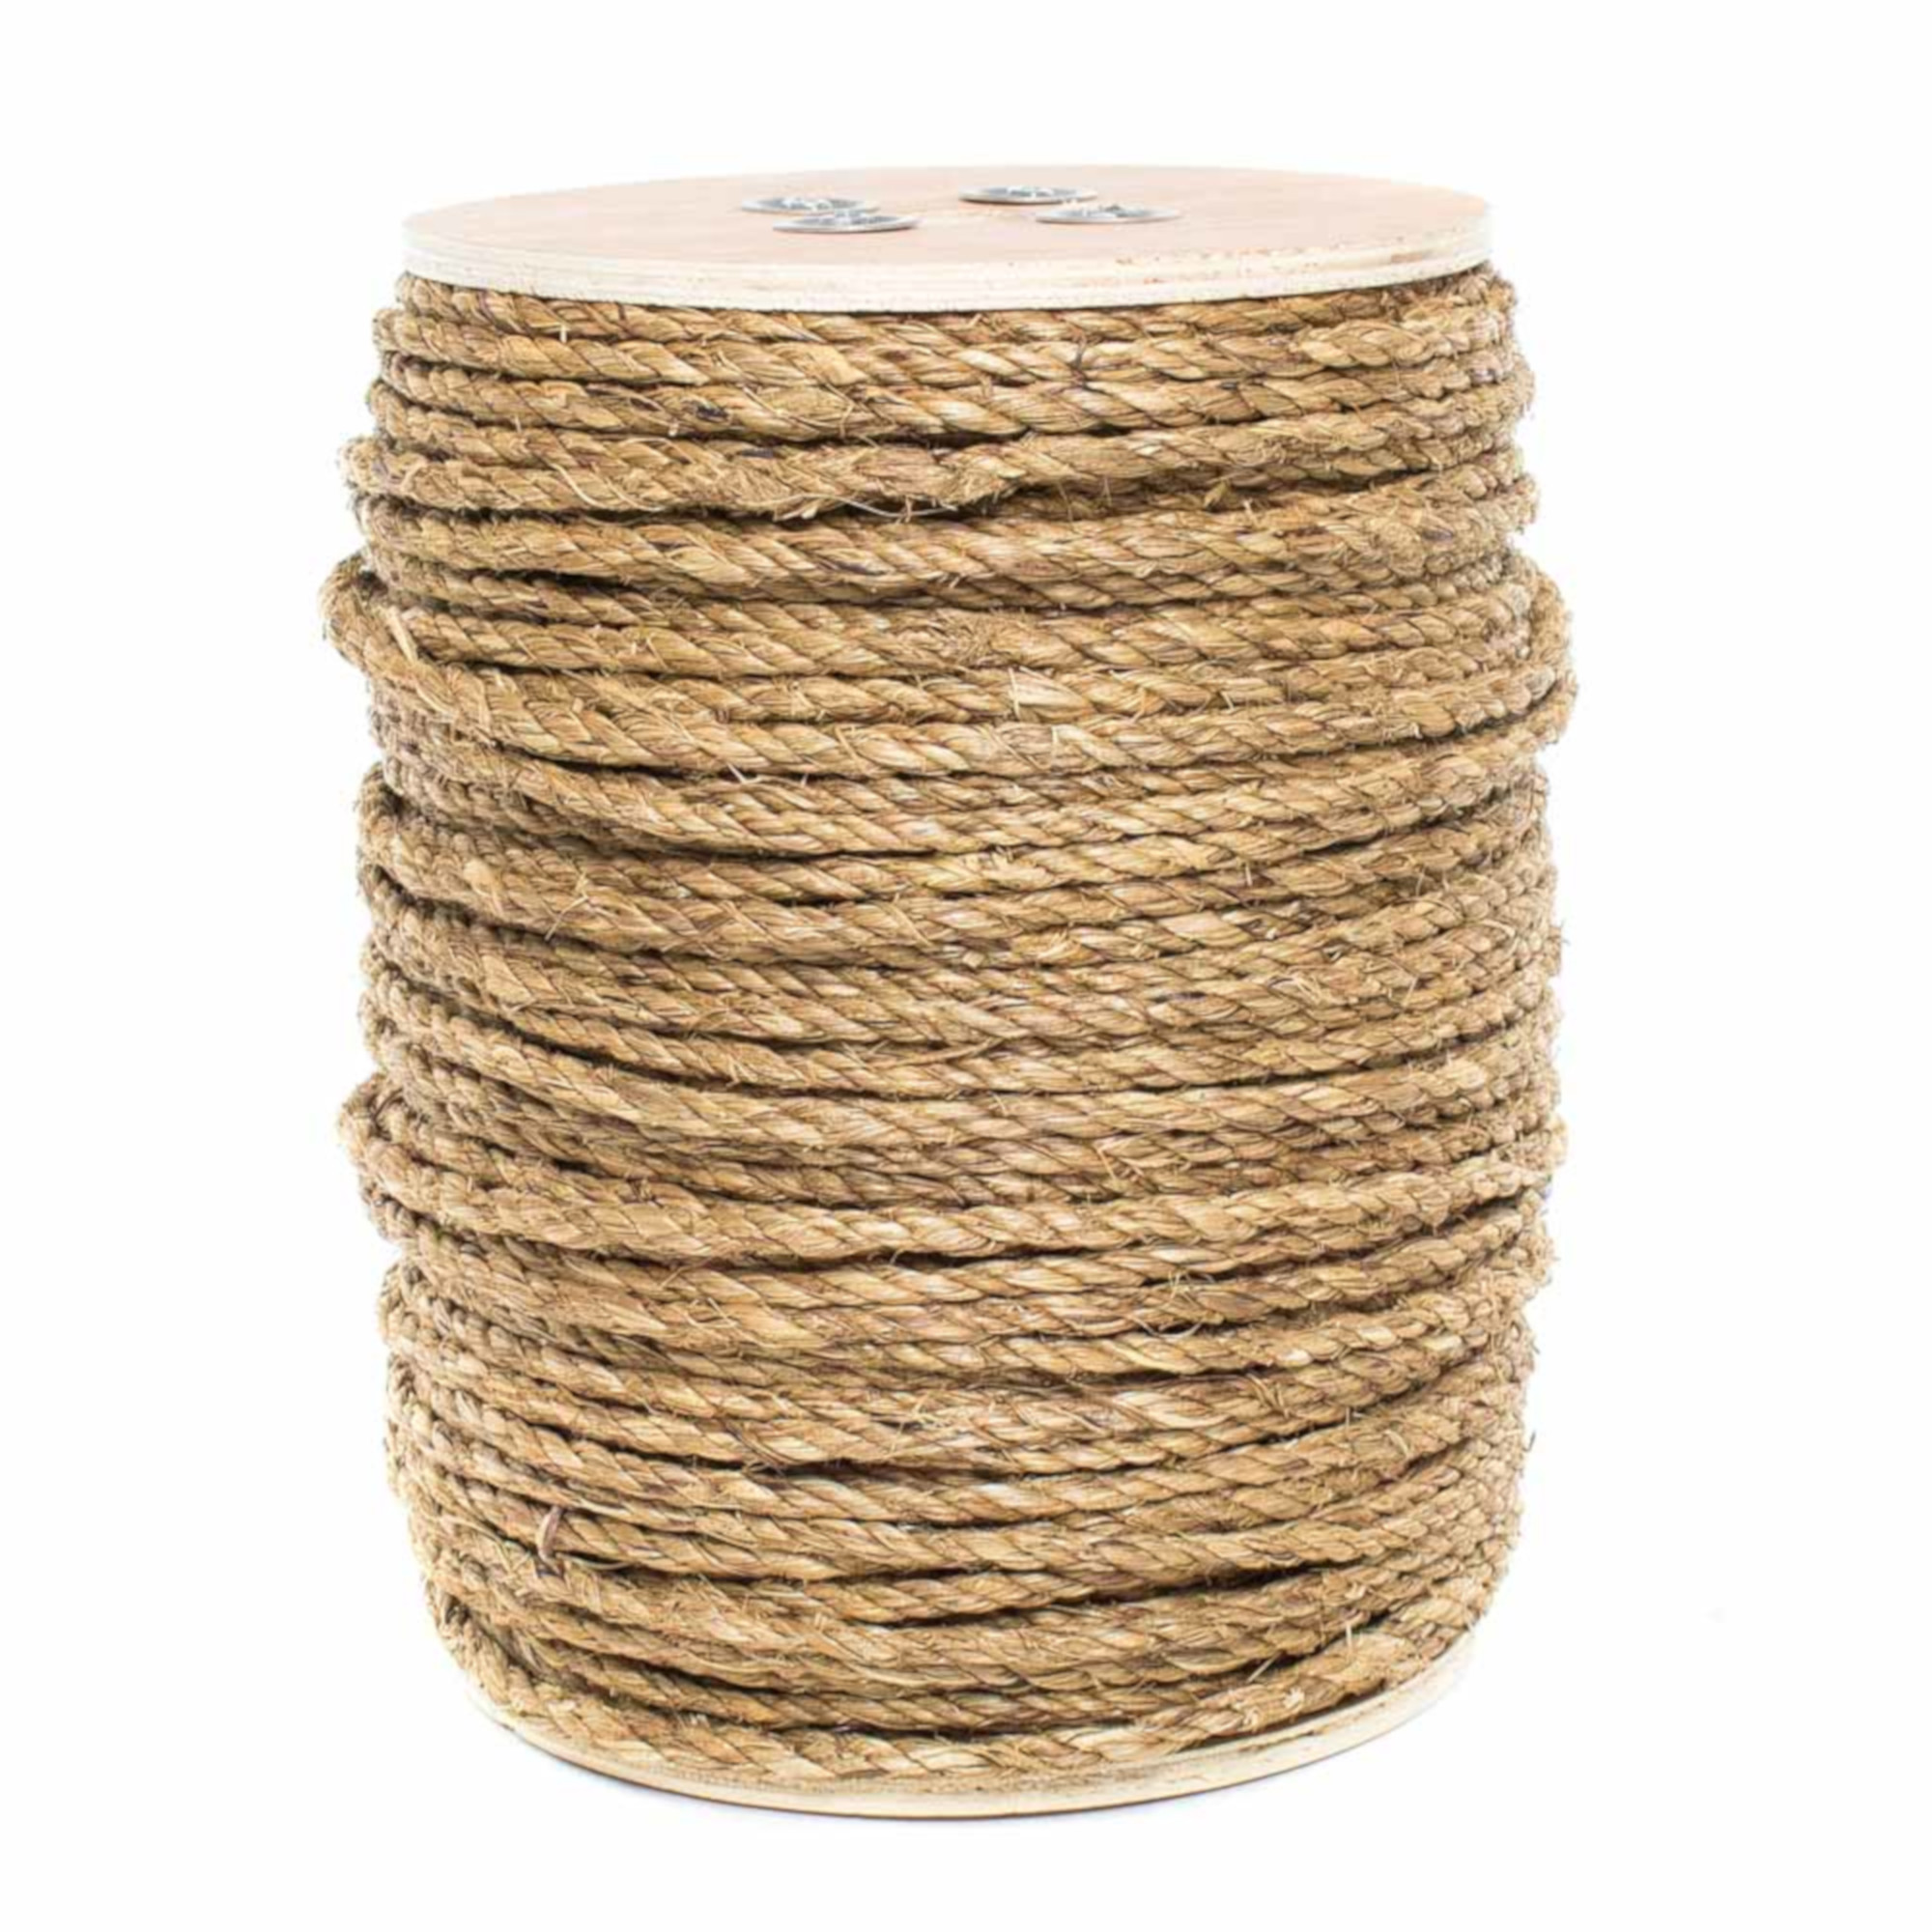 GOLBERG Manila Rope - Heavy Duty 3 Strand Natural Fiber - 1/4 inch, 5/16 inch, 3/8 inch, 1/2 inch, 5/8 inch, 3/4 inch, 1 inch, 2 inch - Available in Different Lengths - image 3 of 5